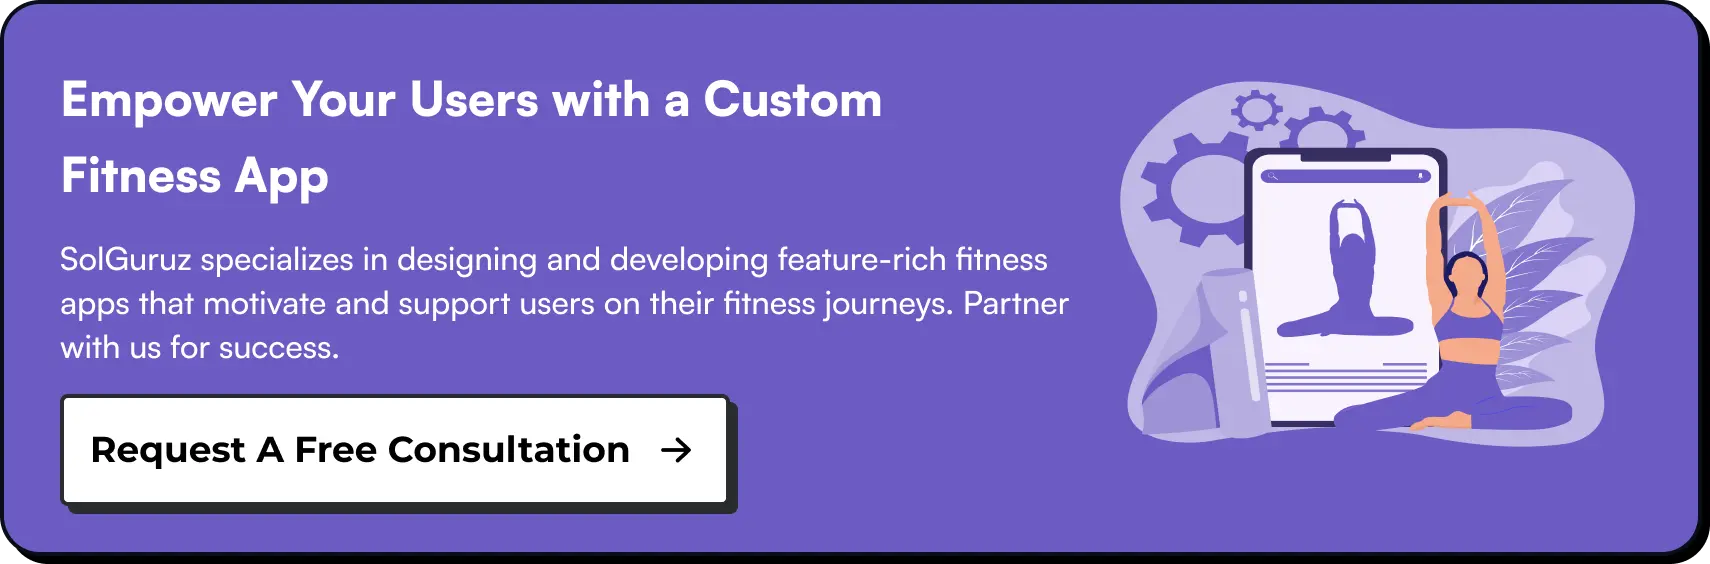 Empower Your Users with a Custom Fitness App. SolGuruz specializes in designing and developing feature-rich fitness apps that motivate and support users on their fitness journeys. Partner with us for success.